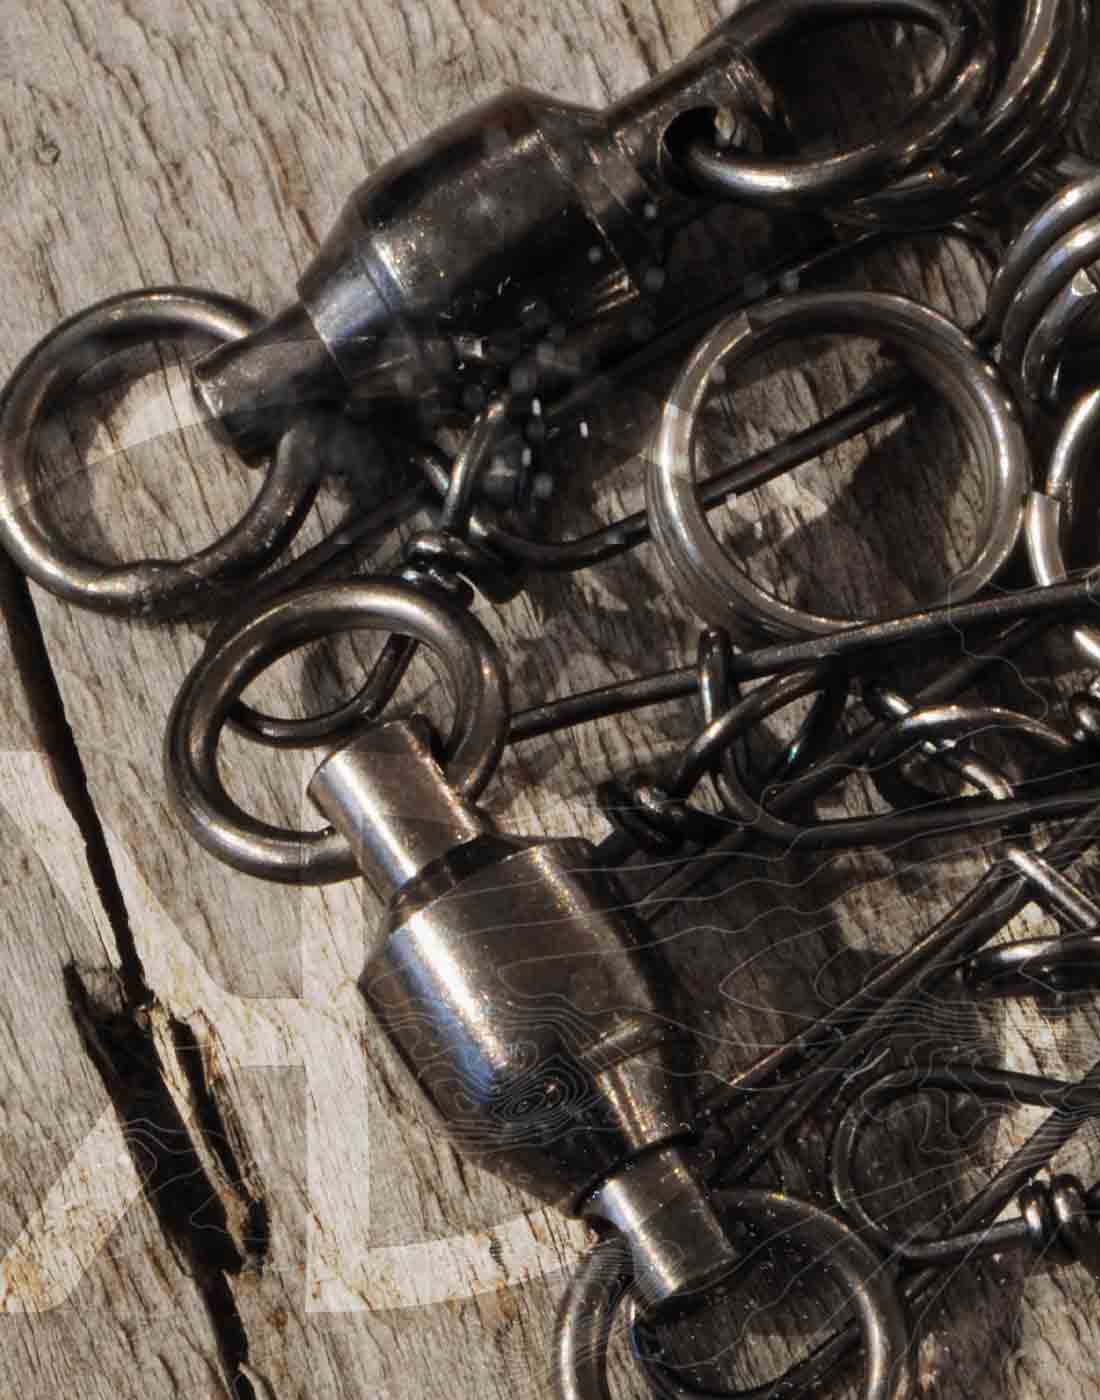 pike & musky staylock snaps, swivels and split rings lying on an old wood table